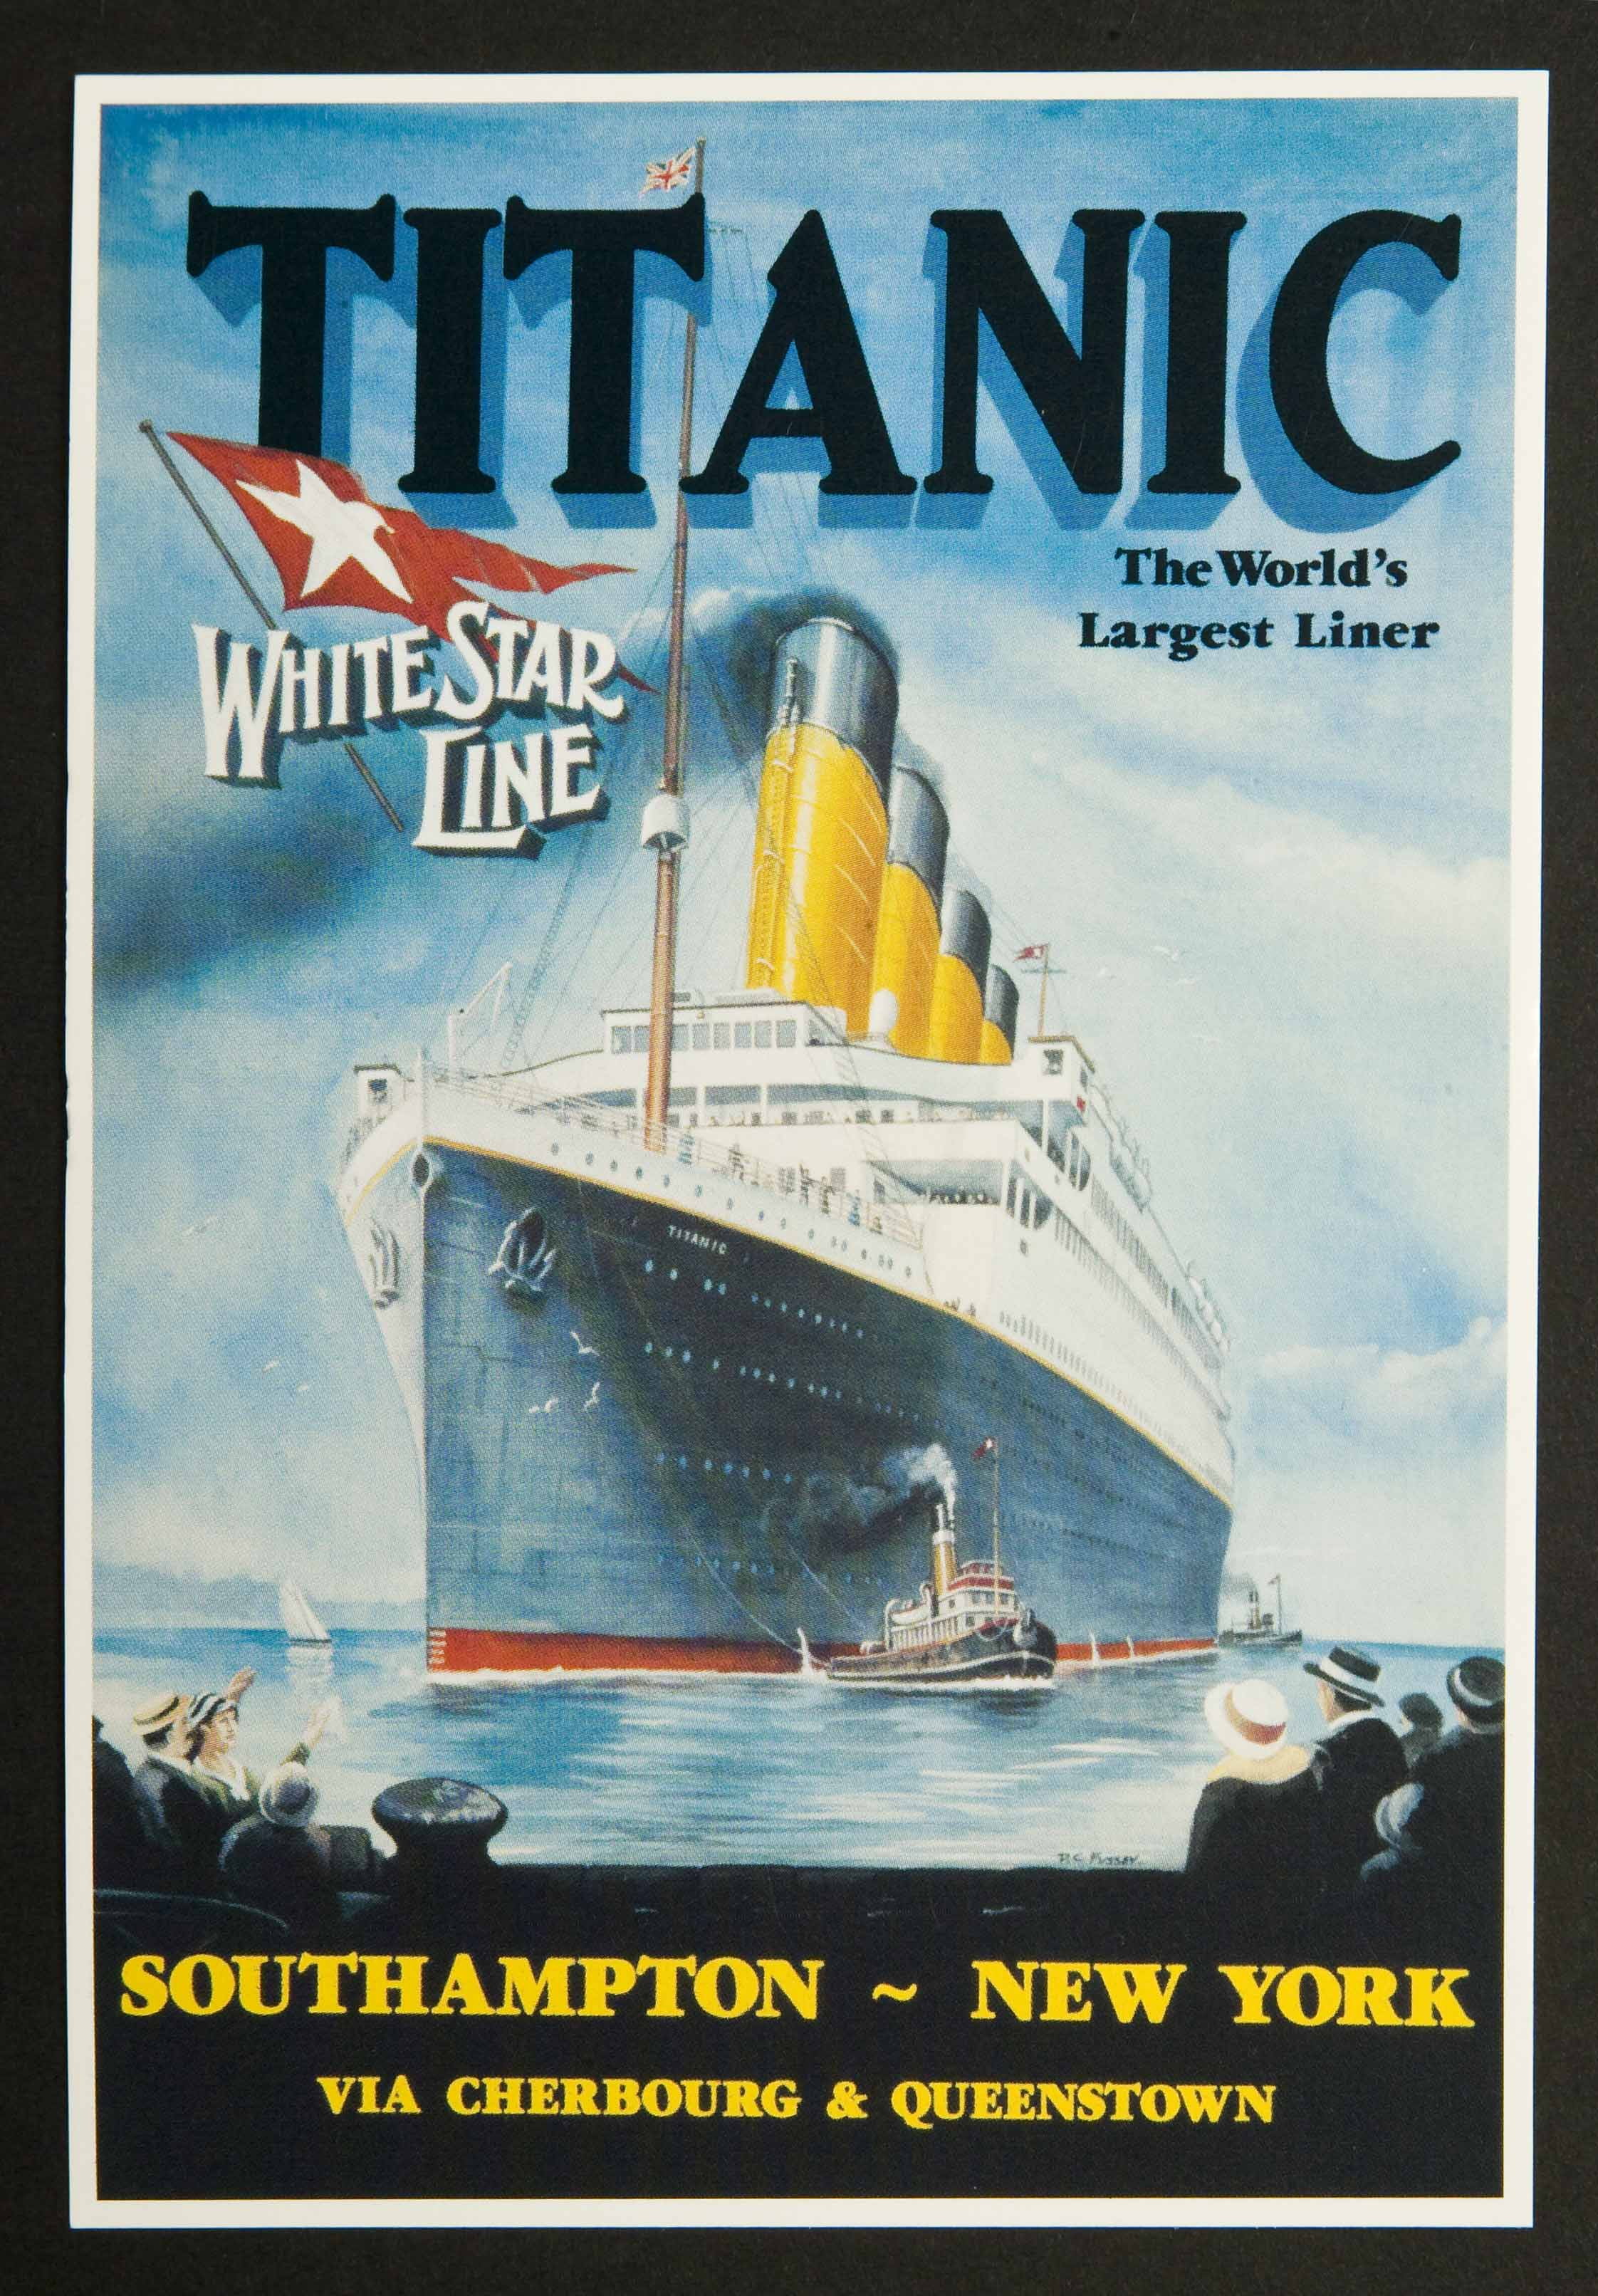 Die Titanic Launch Werbe Reproduktion POSTER 